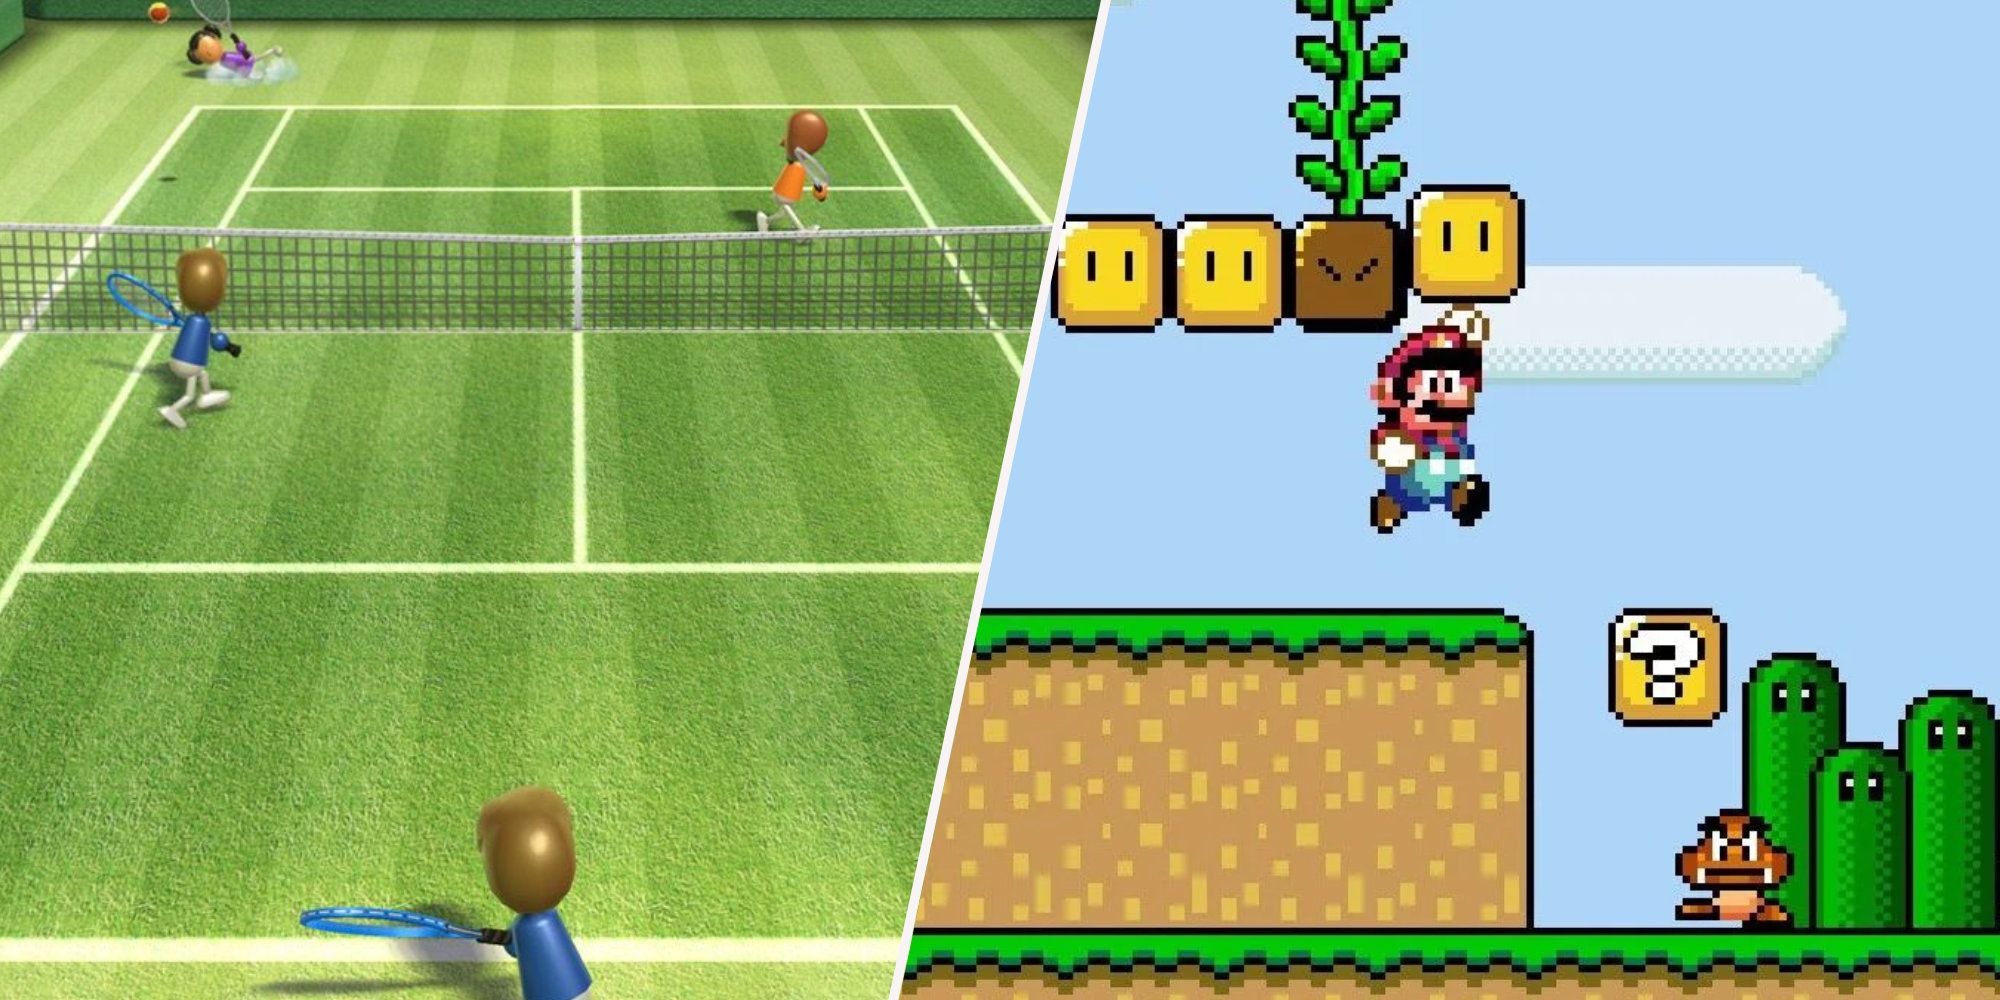 Nintendo games wii sports and mario side by side